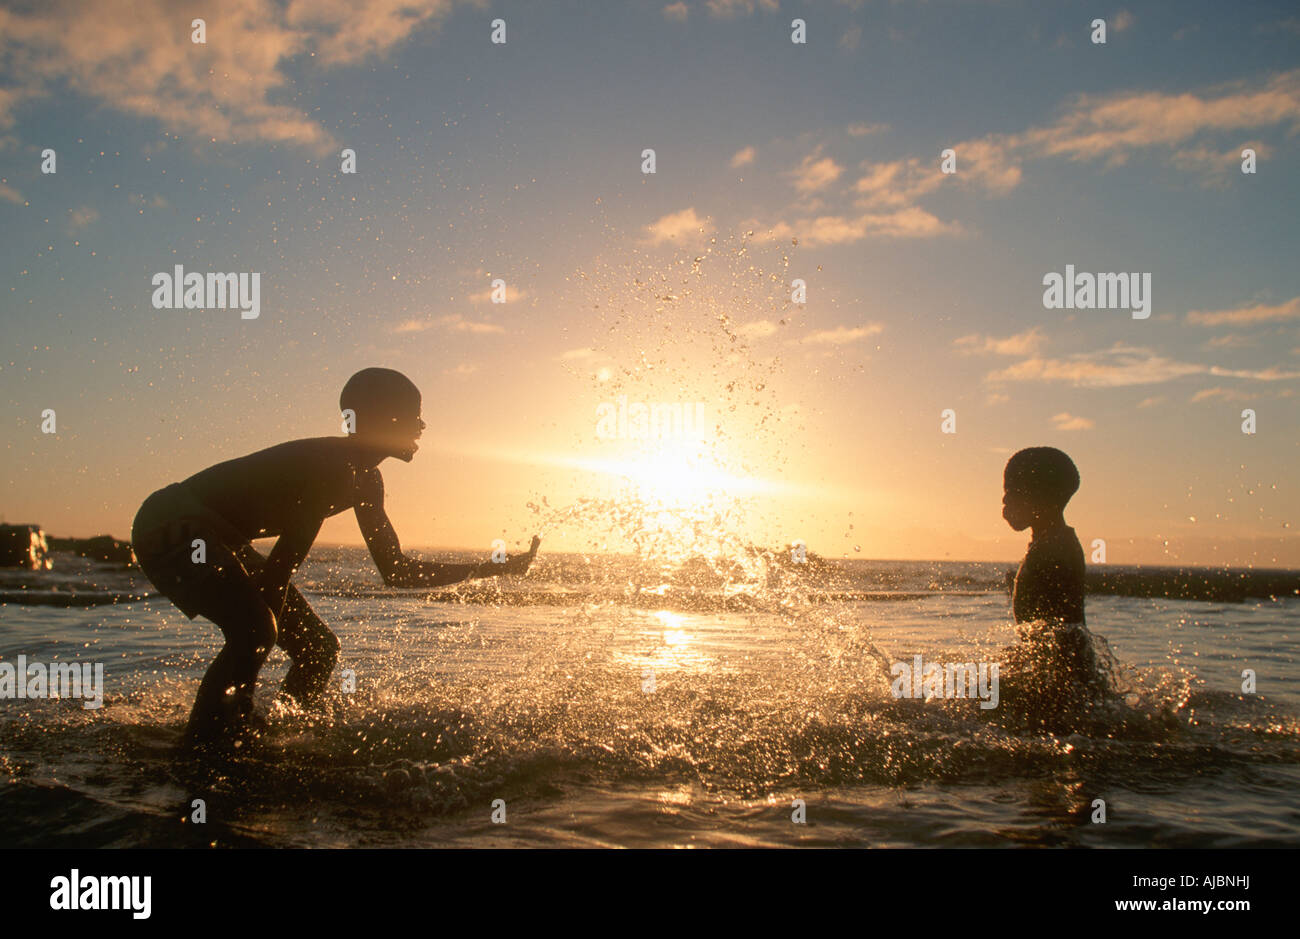 Two Boys Playing in Surf, Silhouetted at Dusk Stock Photo